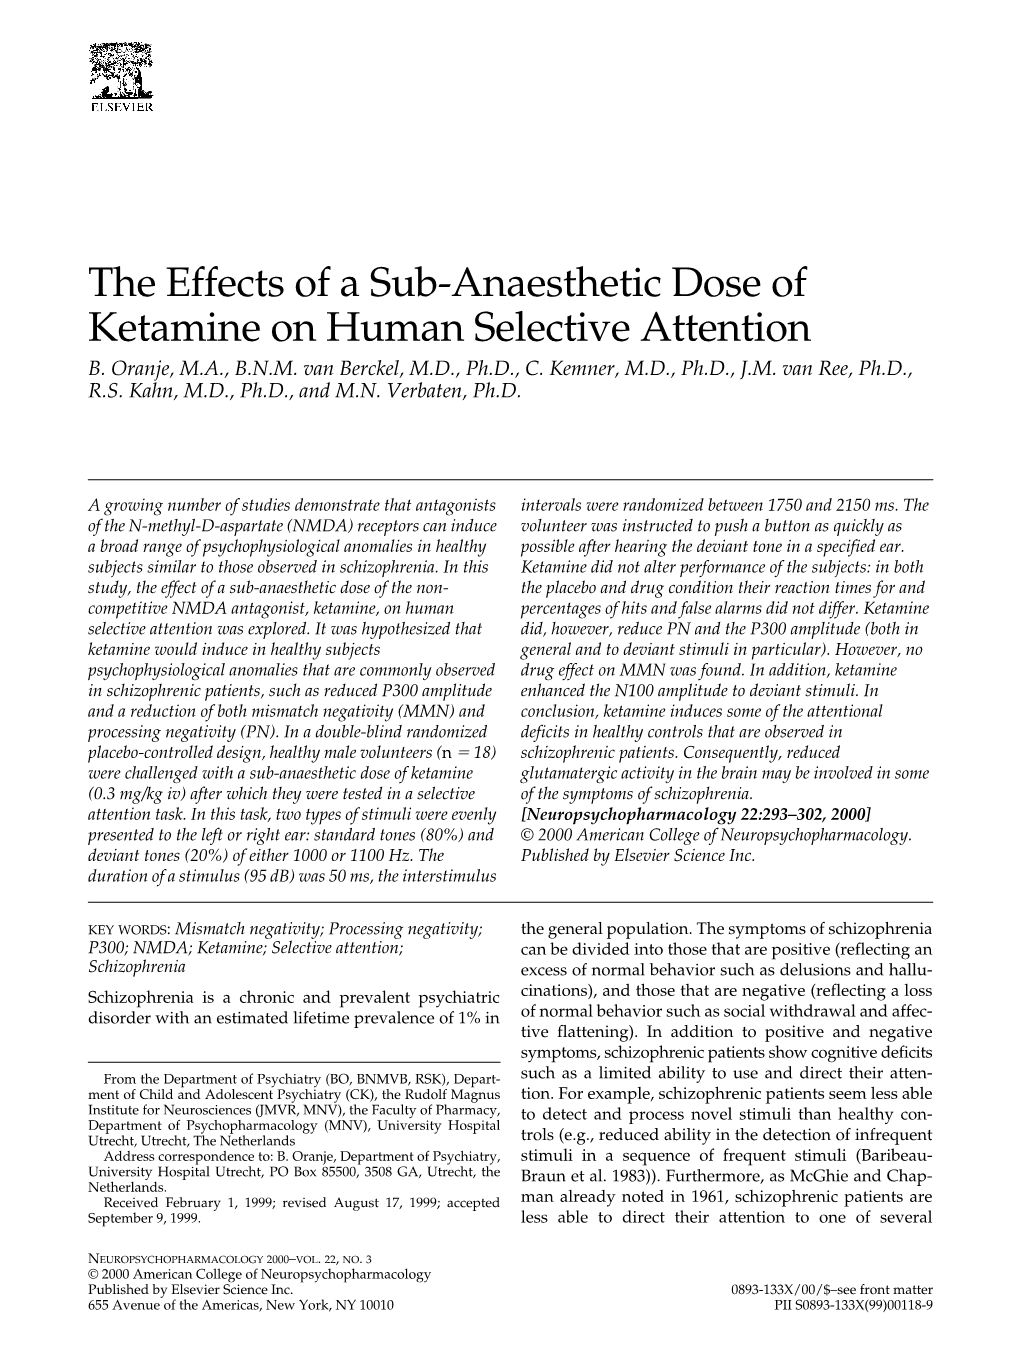 The Effects of a Sub-Anaesthetic Dose of Ketamine on Human Selective Attention B